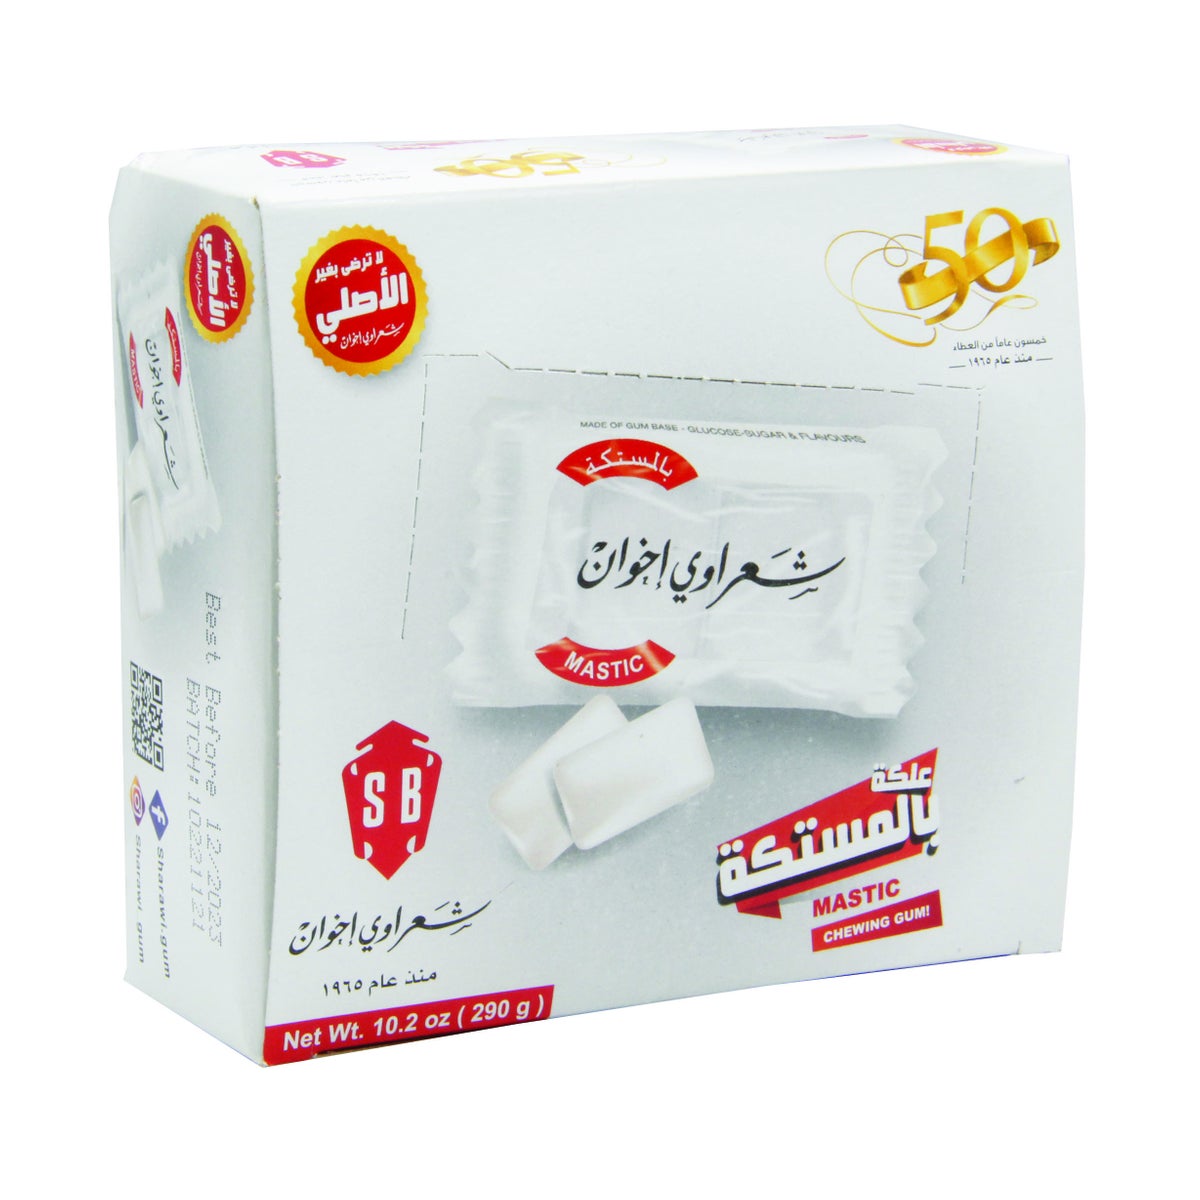 Sharawi Mastic Chewing Gum 100 Ct. x 24 (290g)